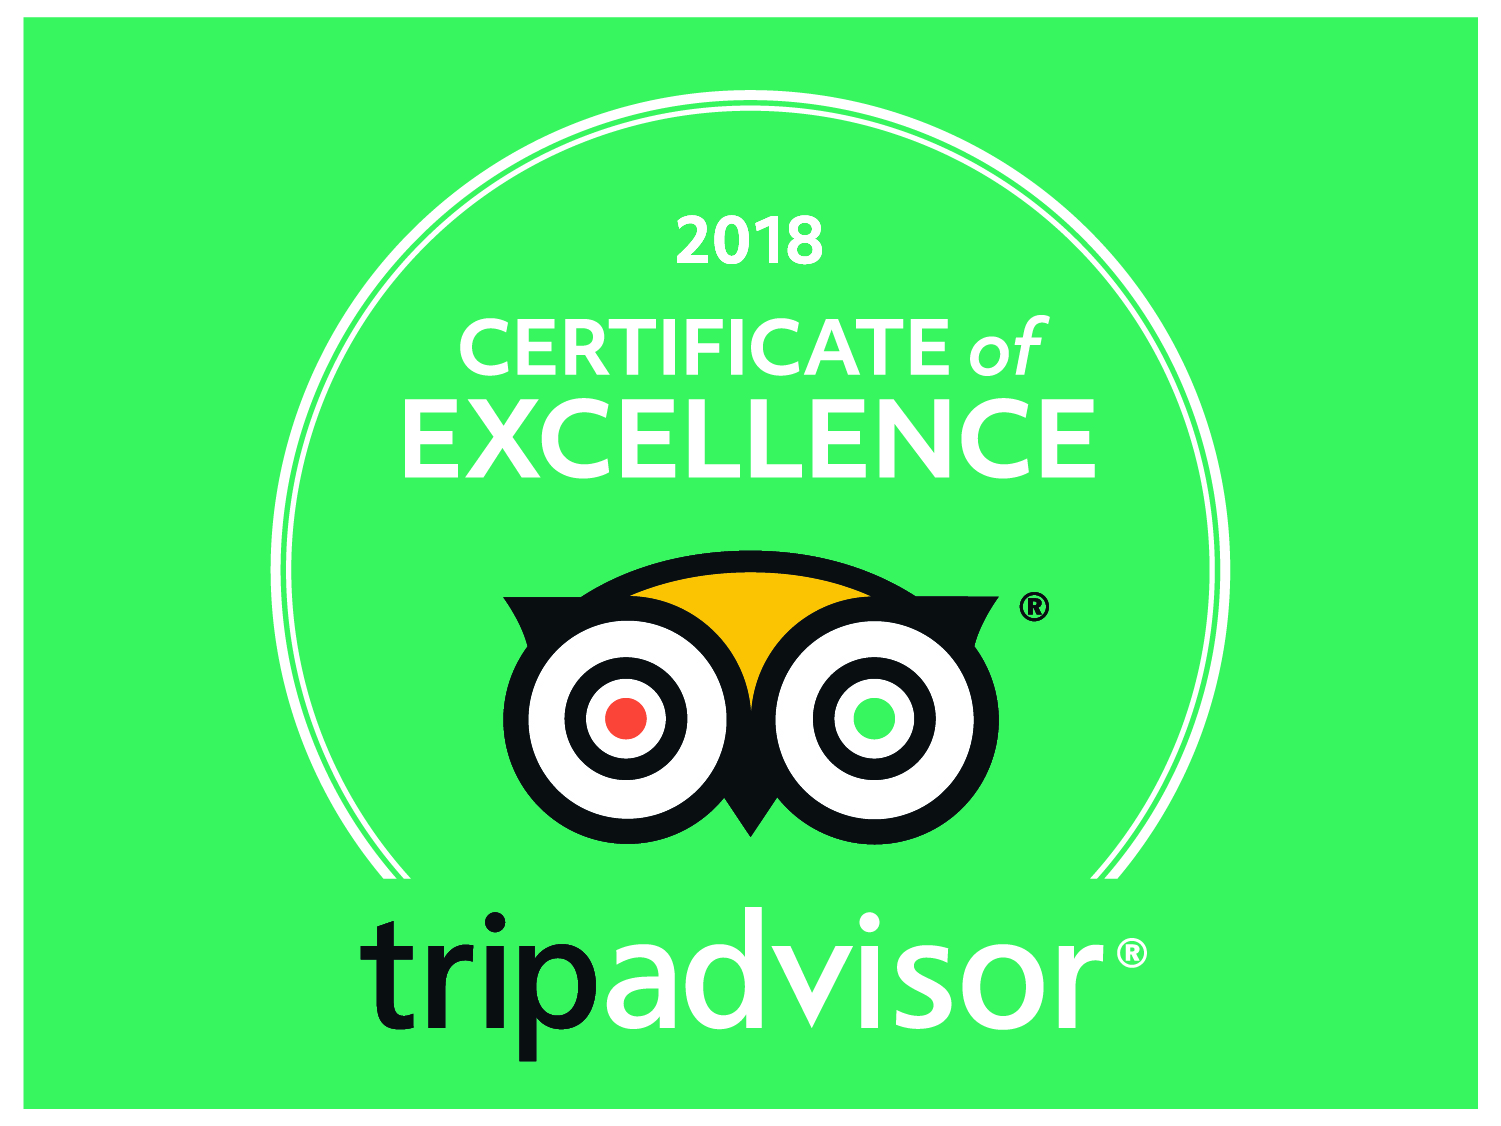 2018 certificate of excellence